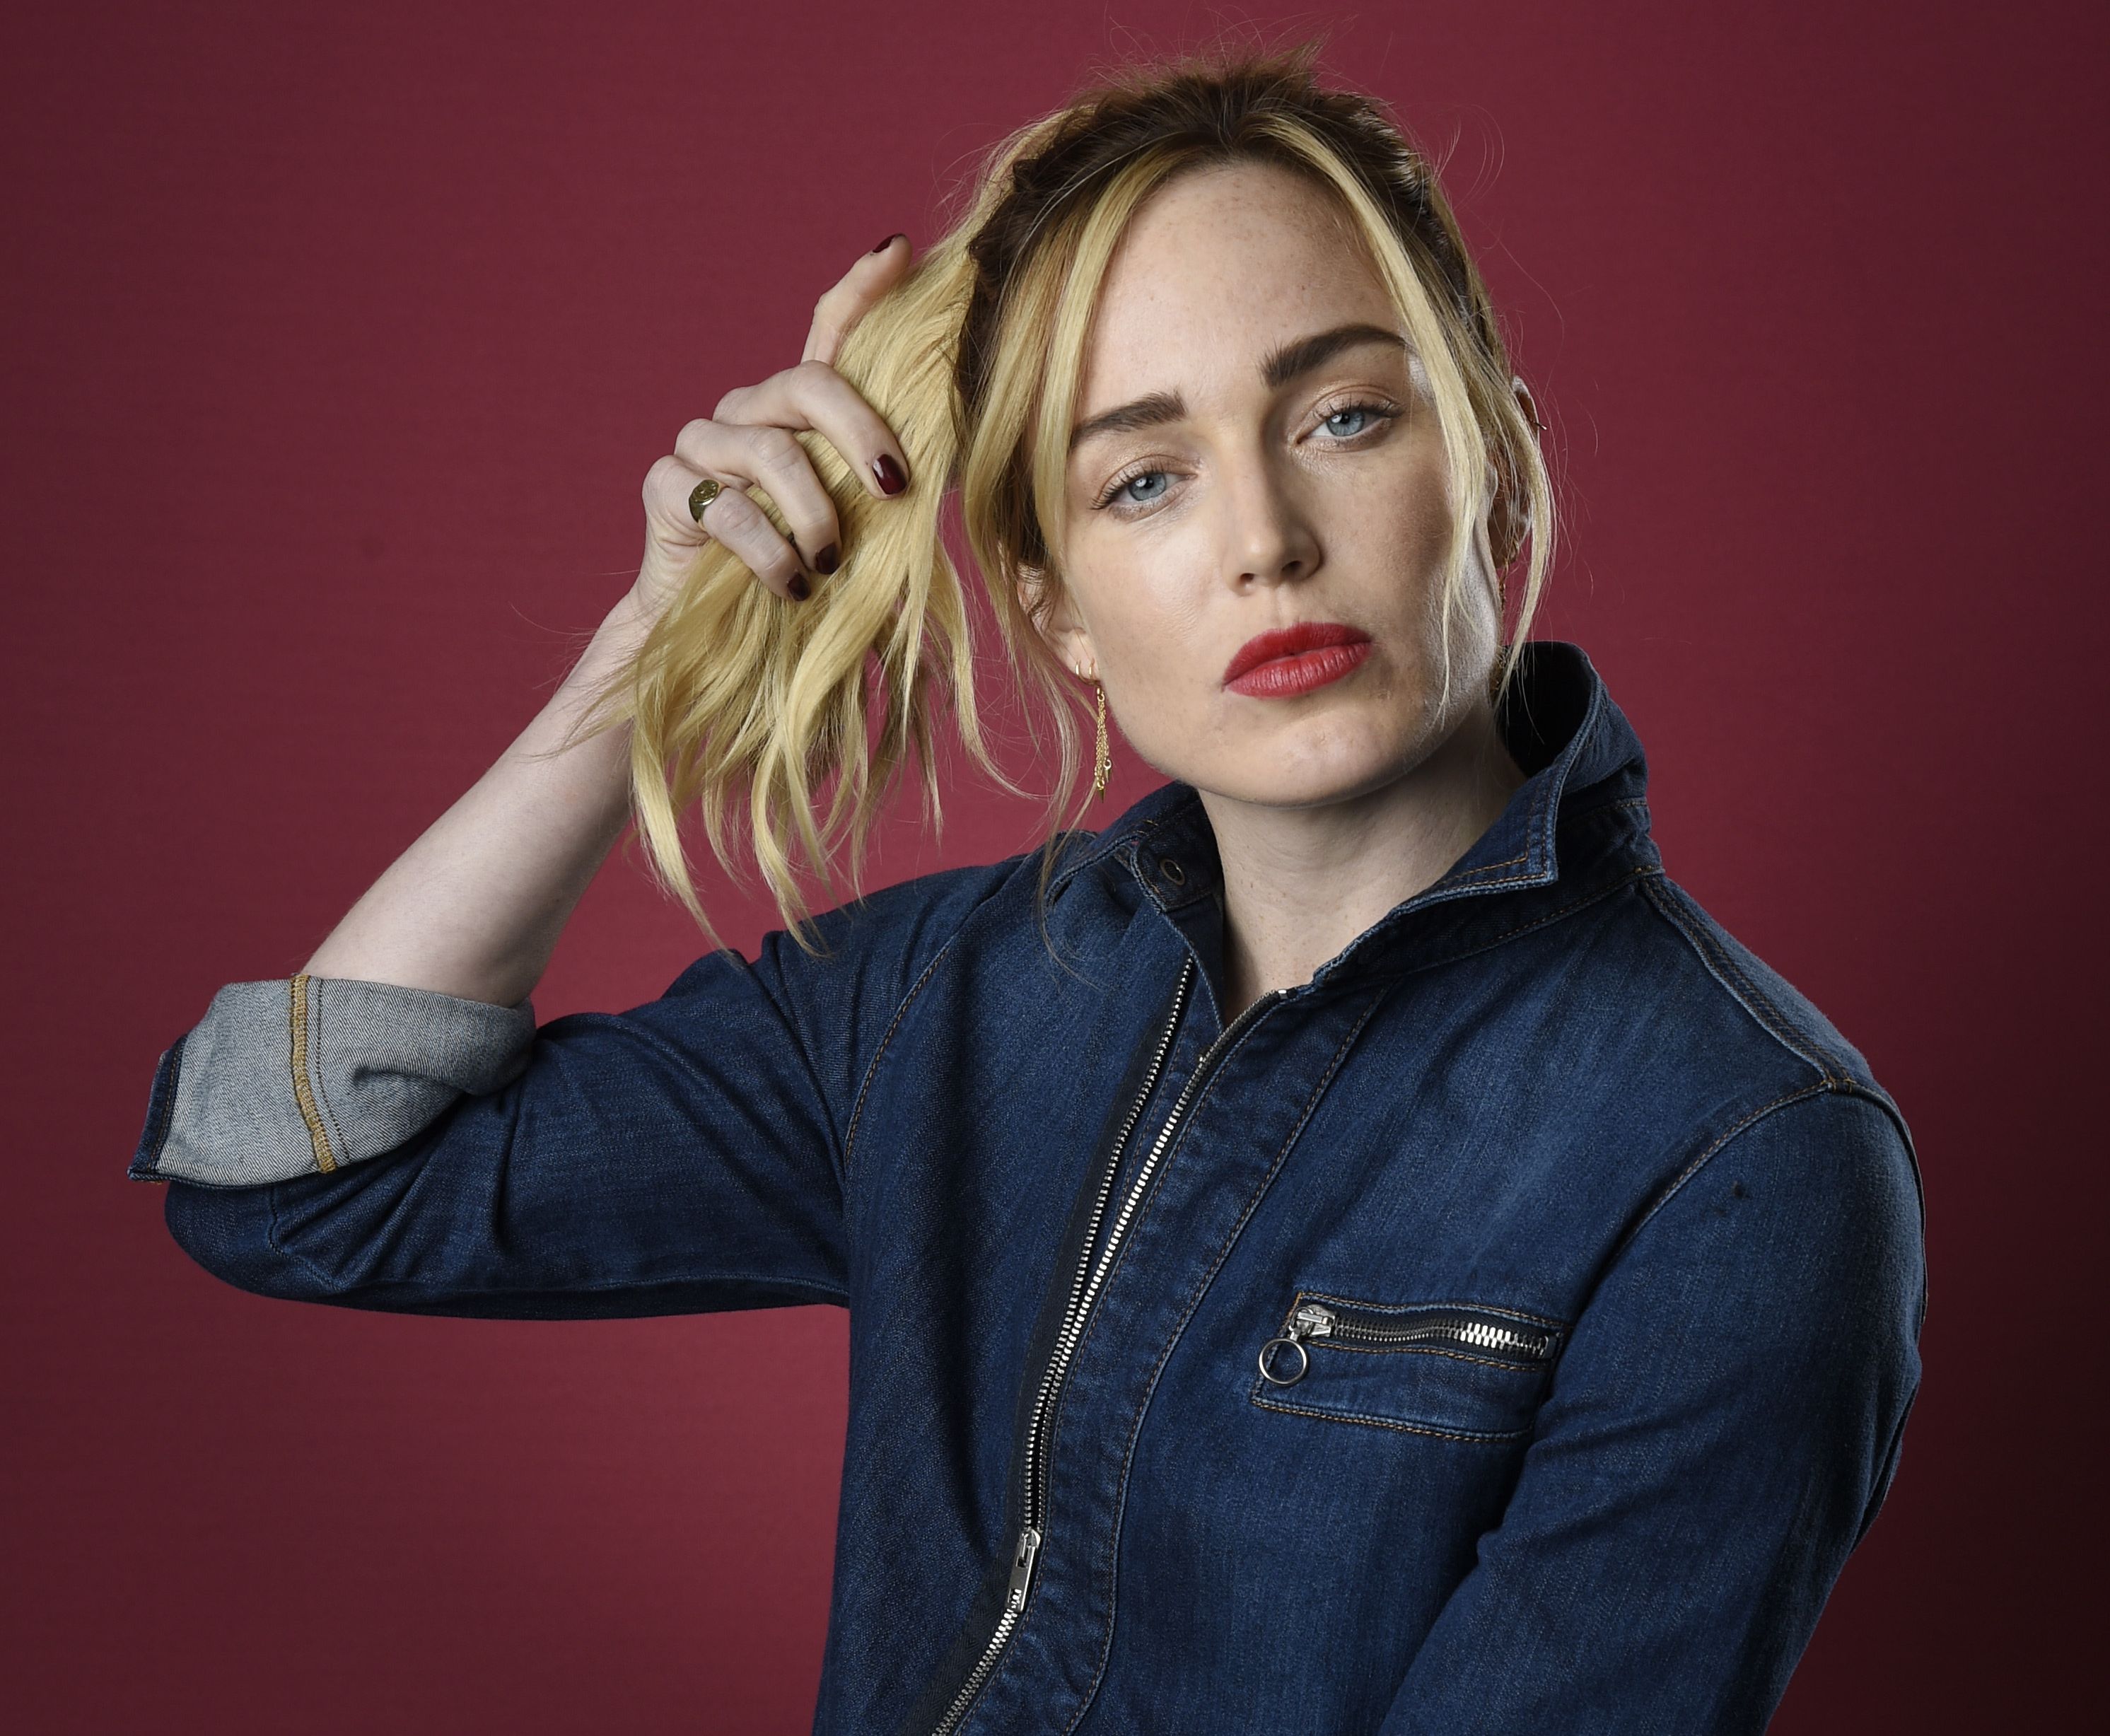 Caity Lotz In Legends Of Tomorrow 2018 HD Tv Shows 4k Wallpapers Images  Backgrounds Photos and Pictures